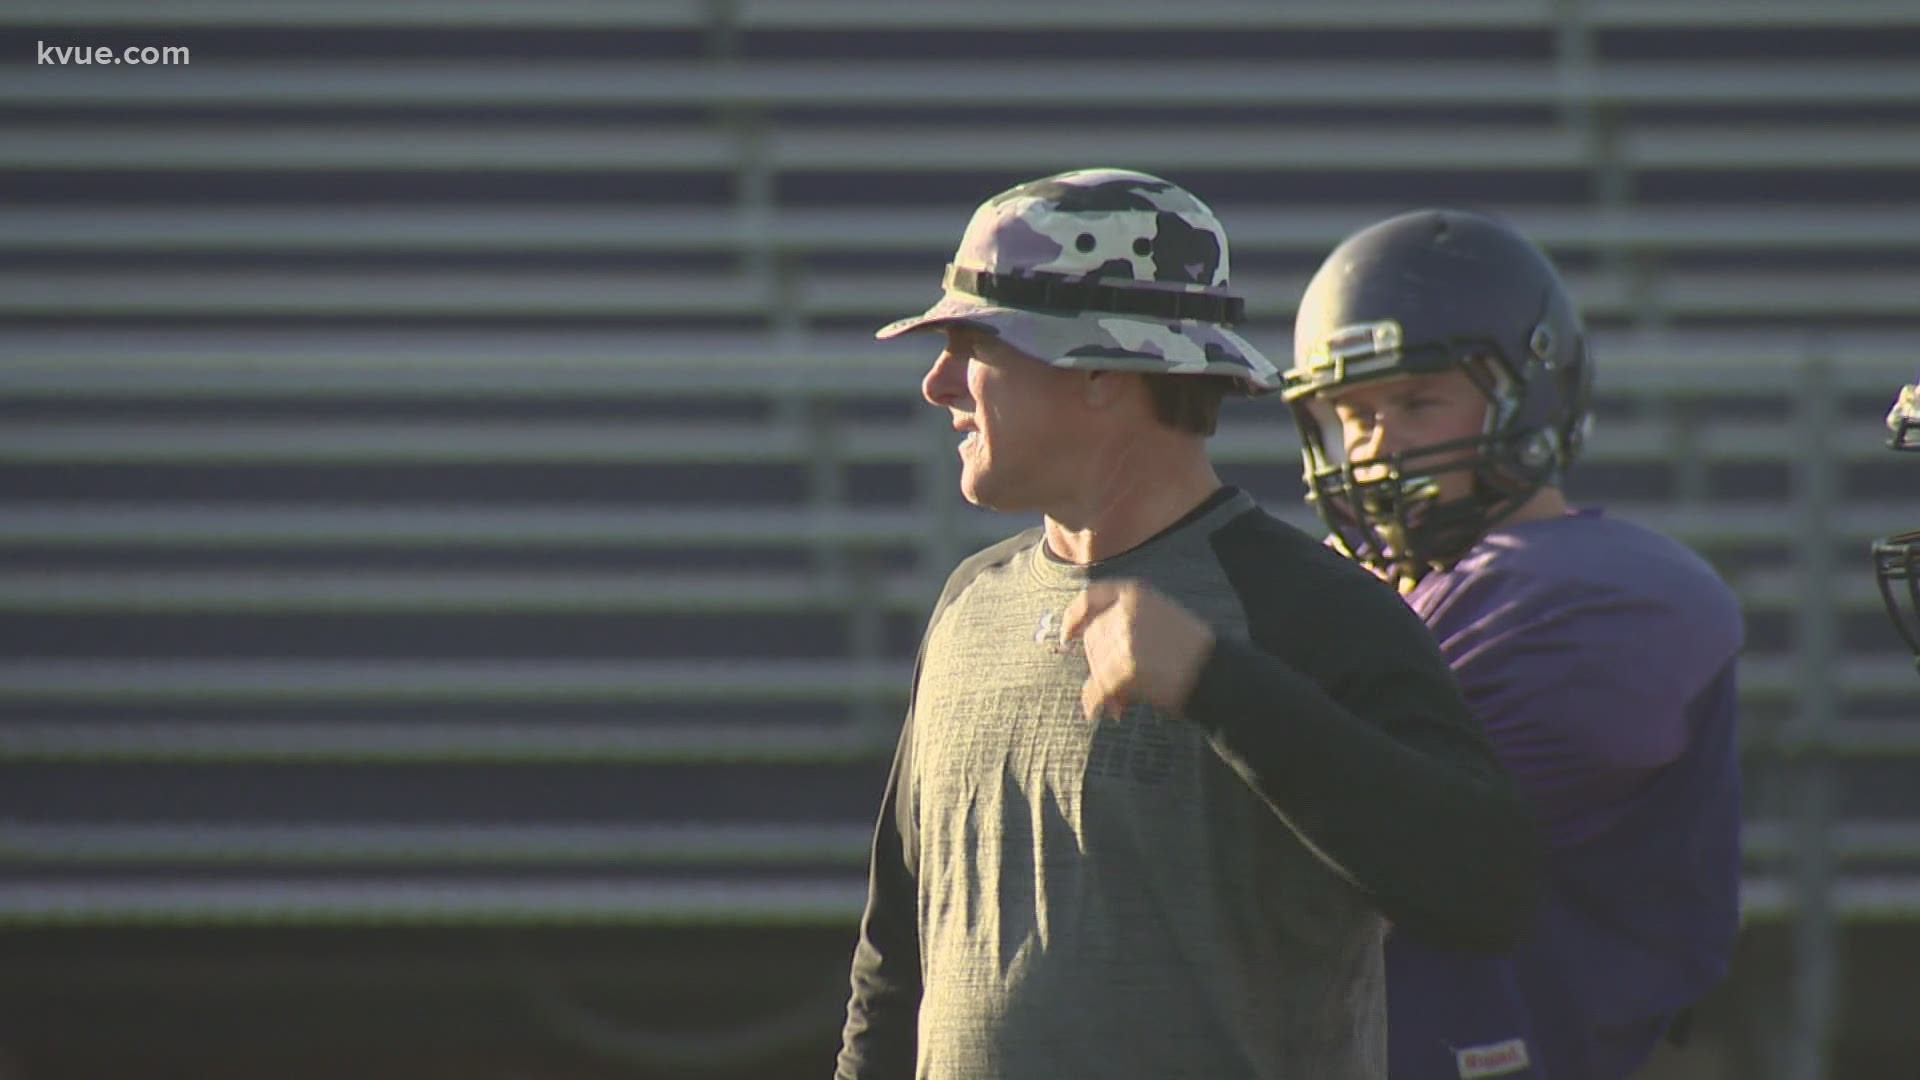 The Liberty Hill High School football community is mourning the loss of a coaching legend. Coach Jeff Walker lost his years-long battle with cancer on Tuesday.